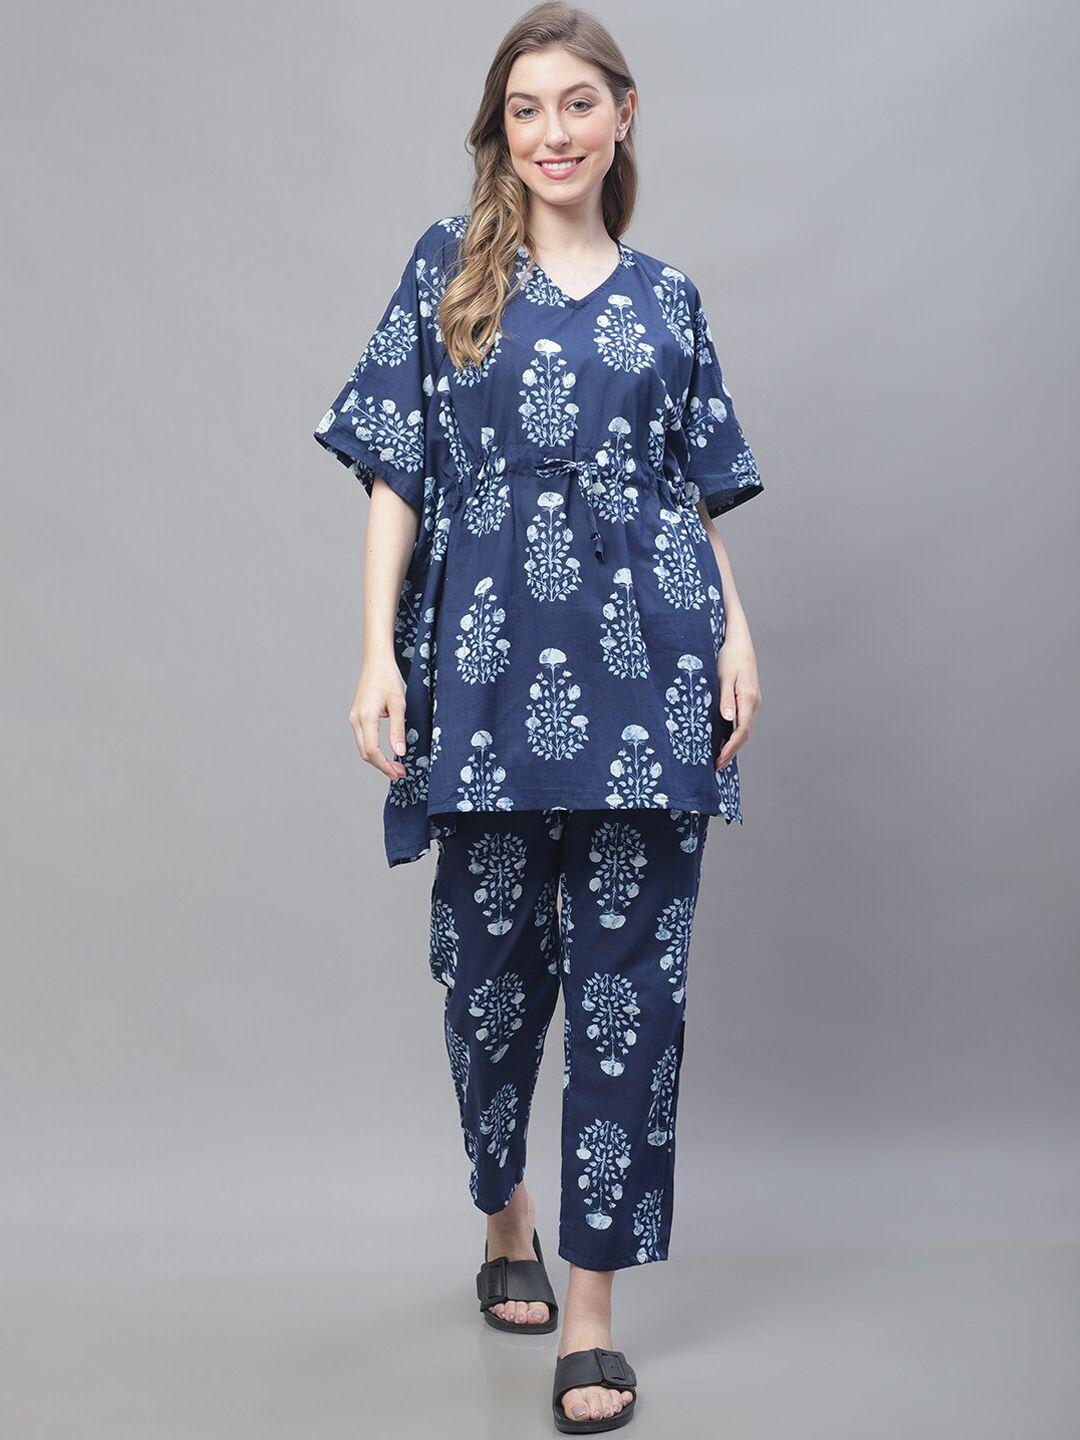 tag 7 floral printed v neck pure cotton kaftan kurta with trousers